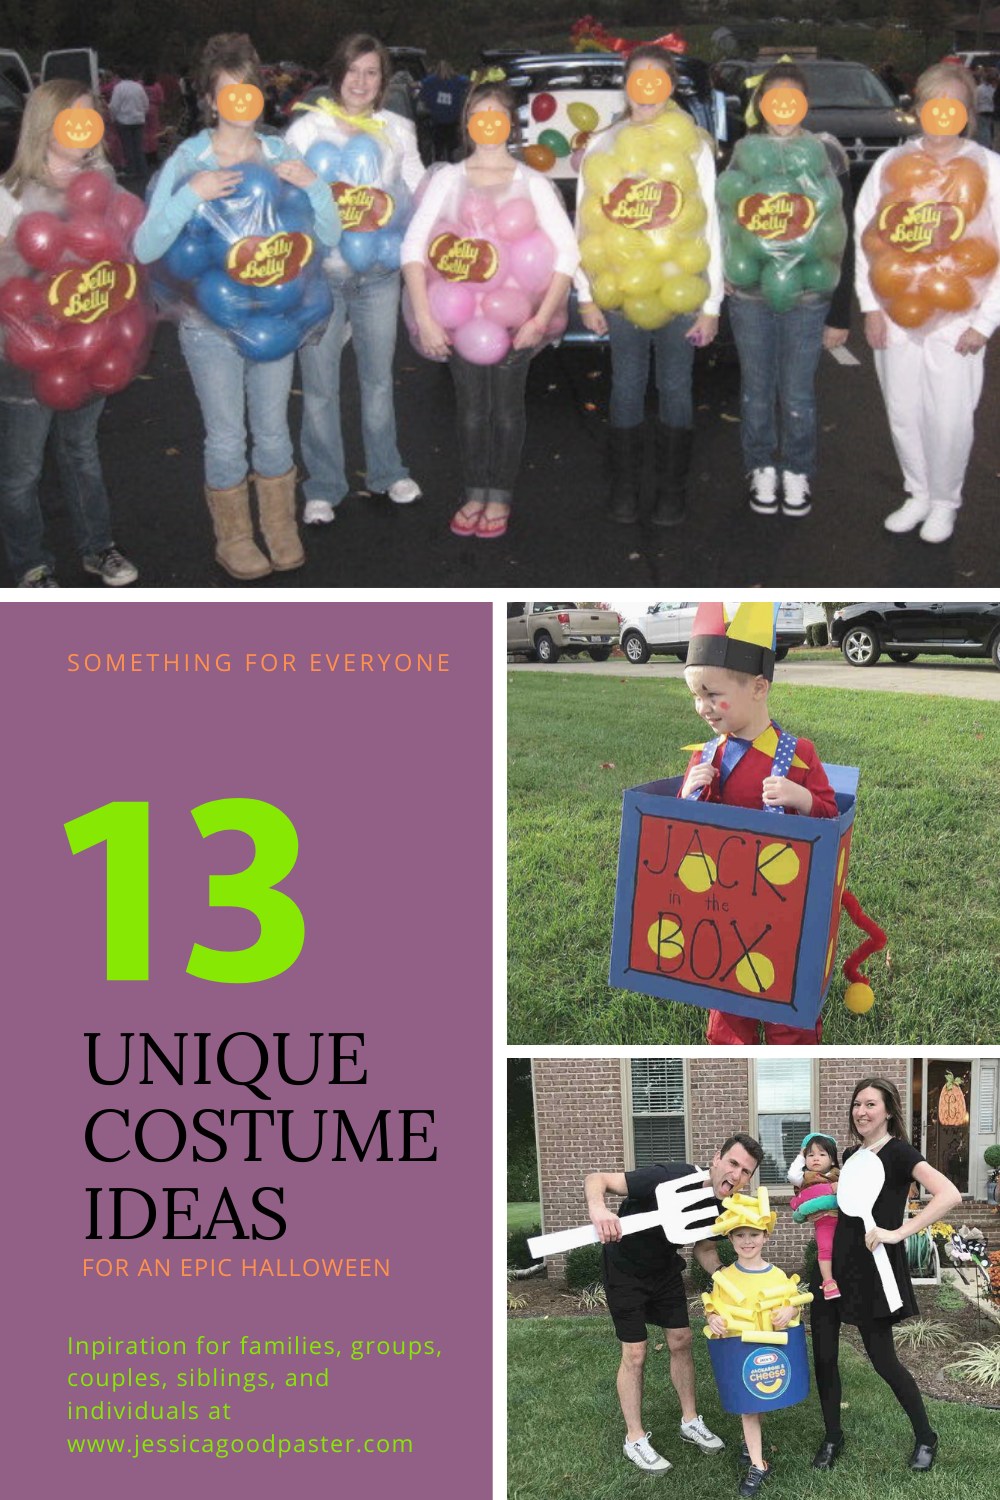 13 Unique Halloween Costume Ideas for You, Your Family, or Group! Find the perfect costume for individuals, couples, families, groups, and kids. Includes some of the best DIY costume ideas as well. #halloween #costumes #halloweencostumes #couplecostumes #groupcostume #diycostumes #familycostume #trunkortreat